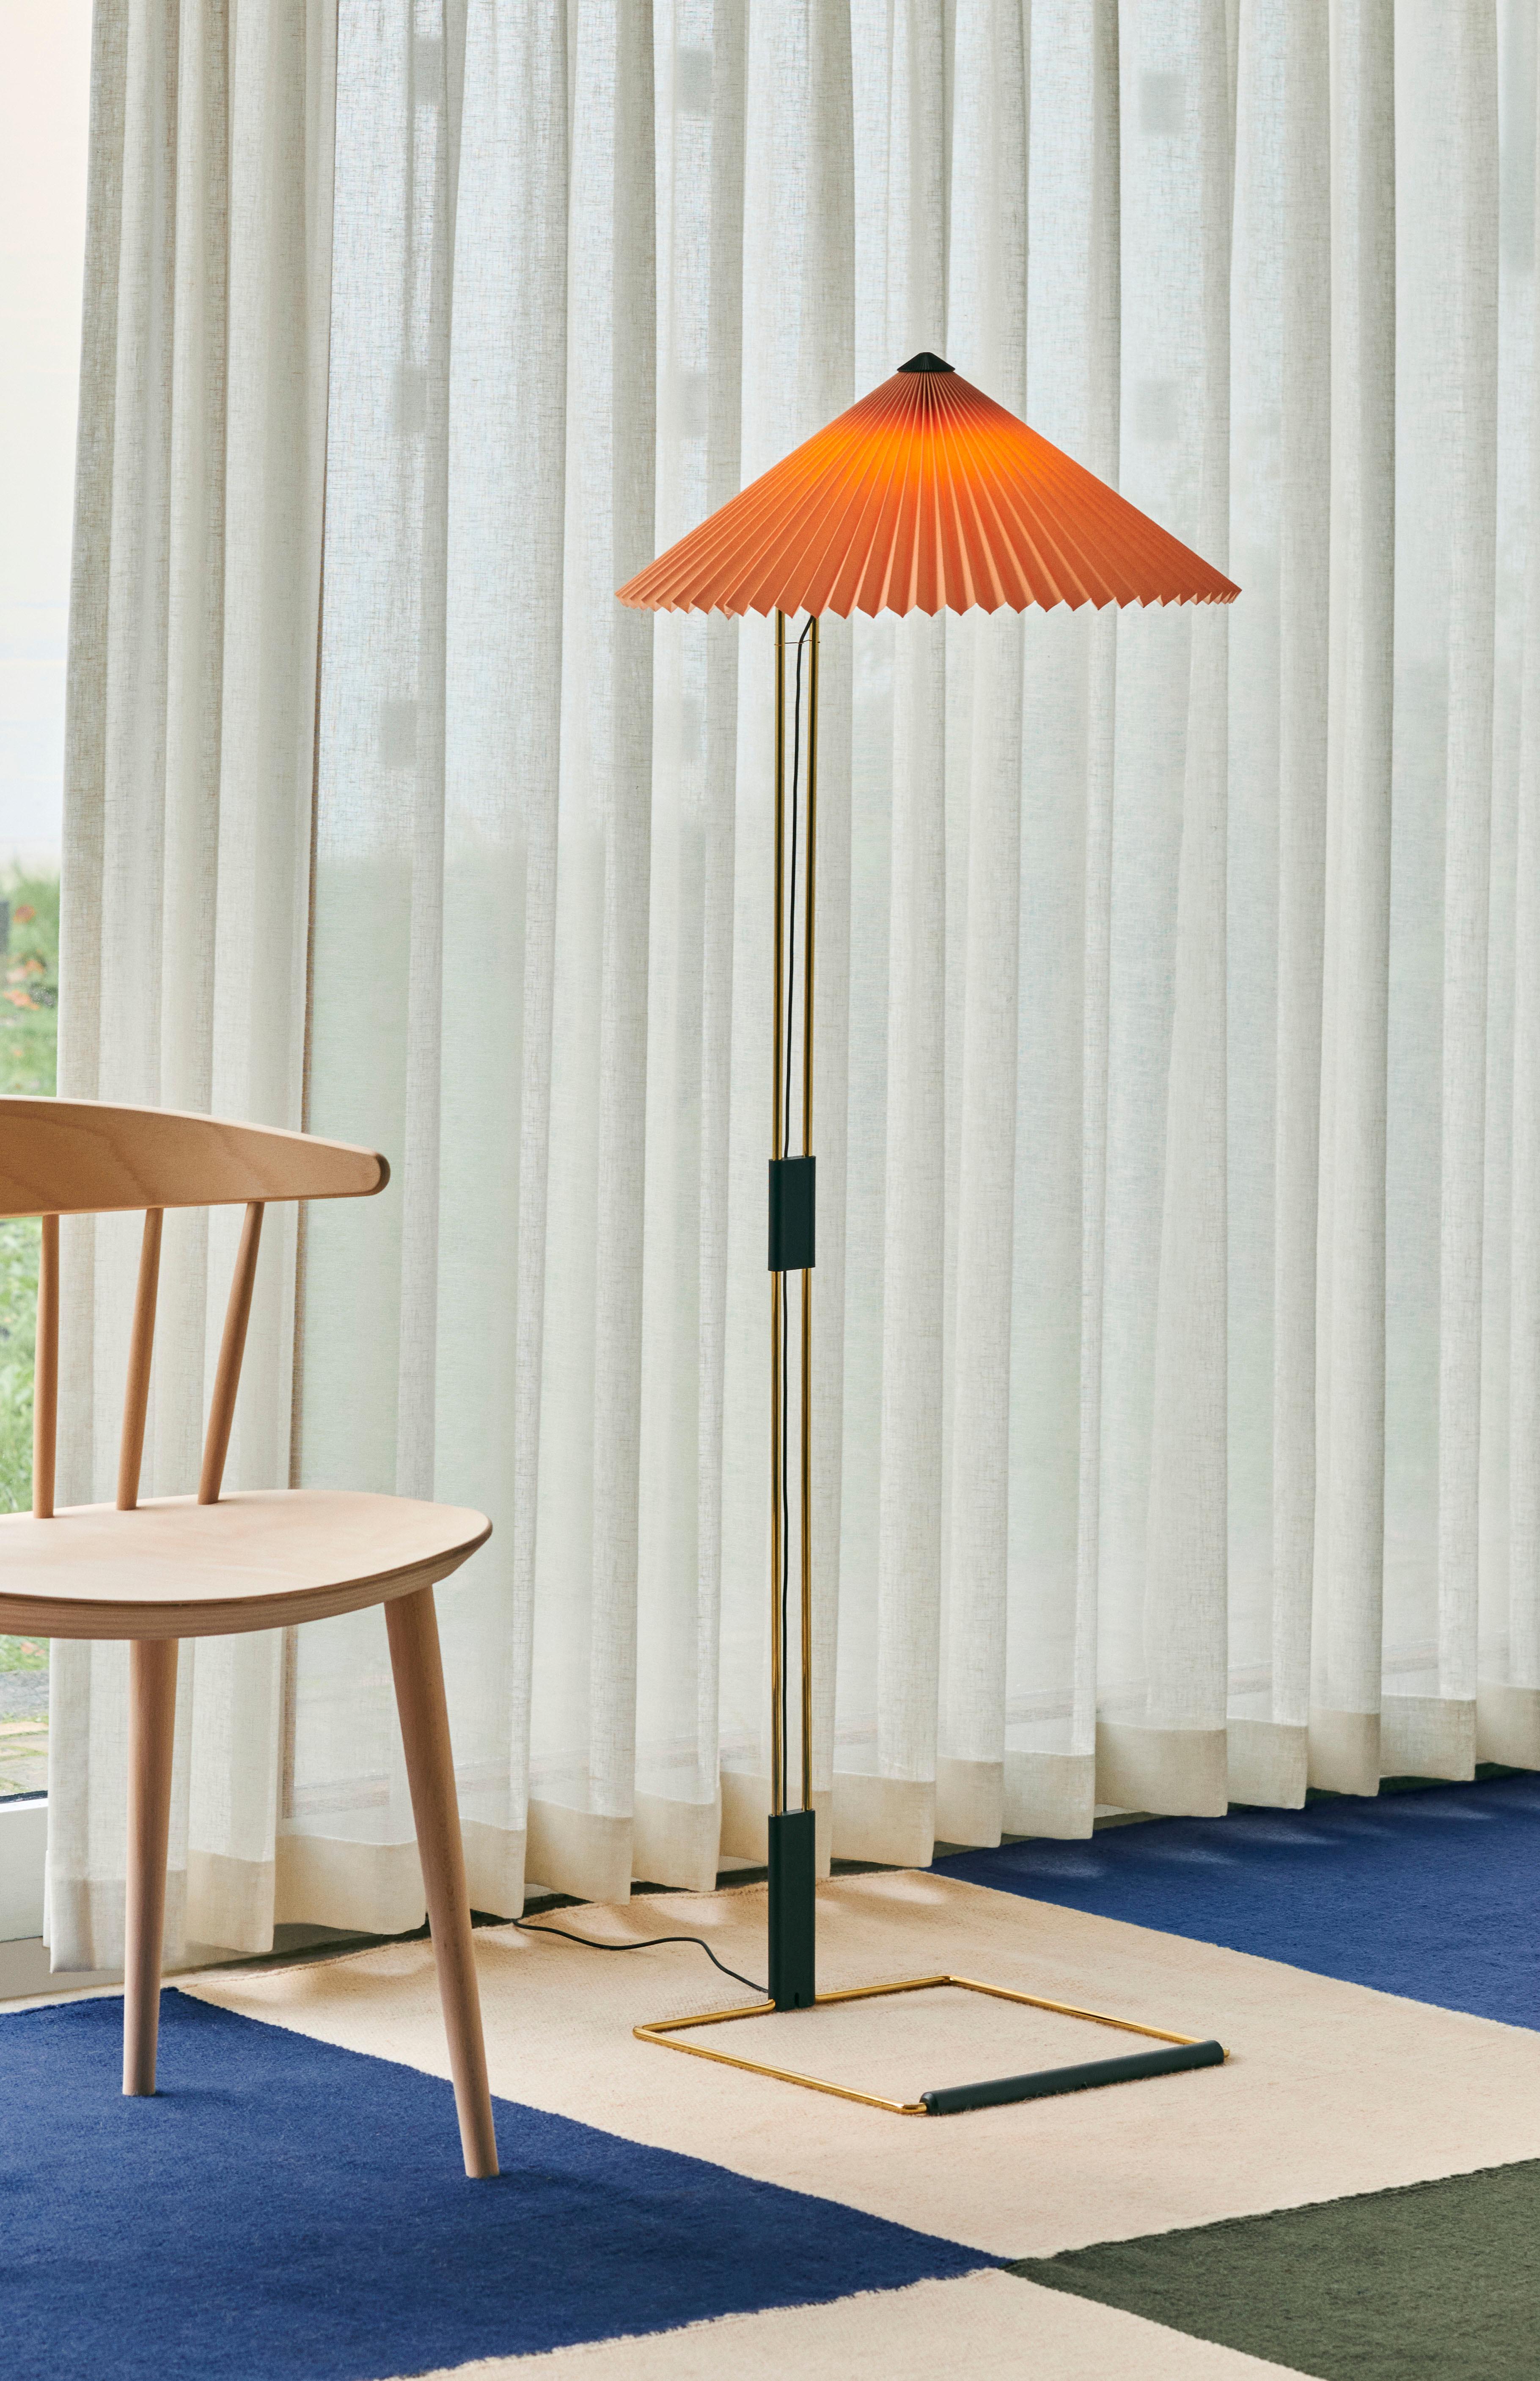 The Matin Floor Lamp offers a contemporary yet poetic design, with a construction that combines visual delicacy with physical robustness. 

The flat-packed design consists of a slender polished brass steel frame complemented with matte black